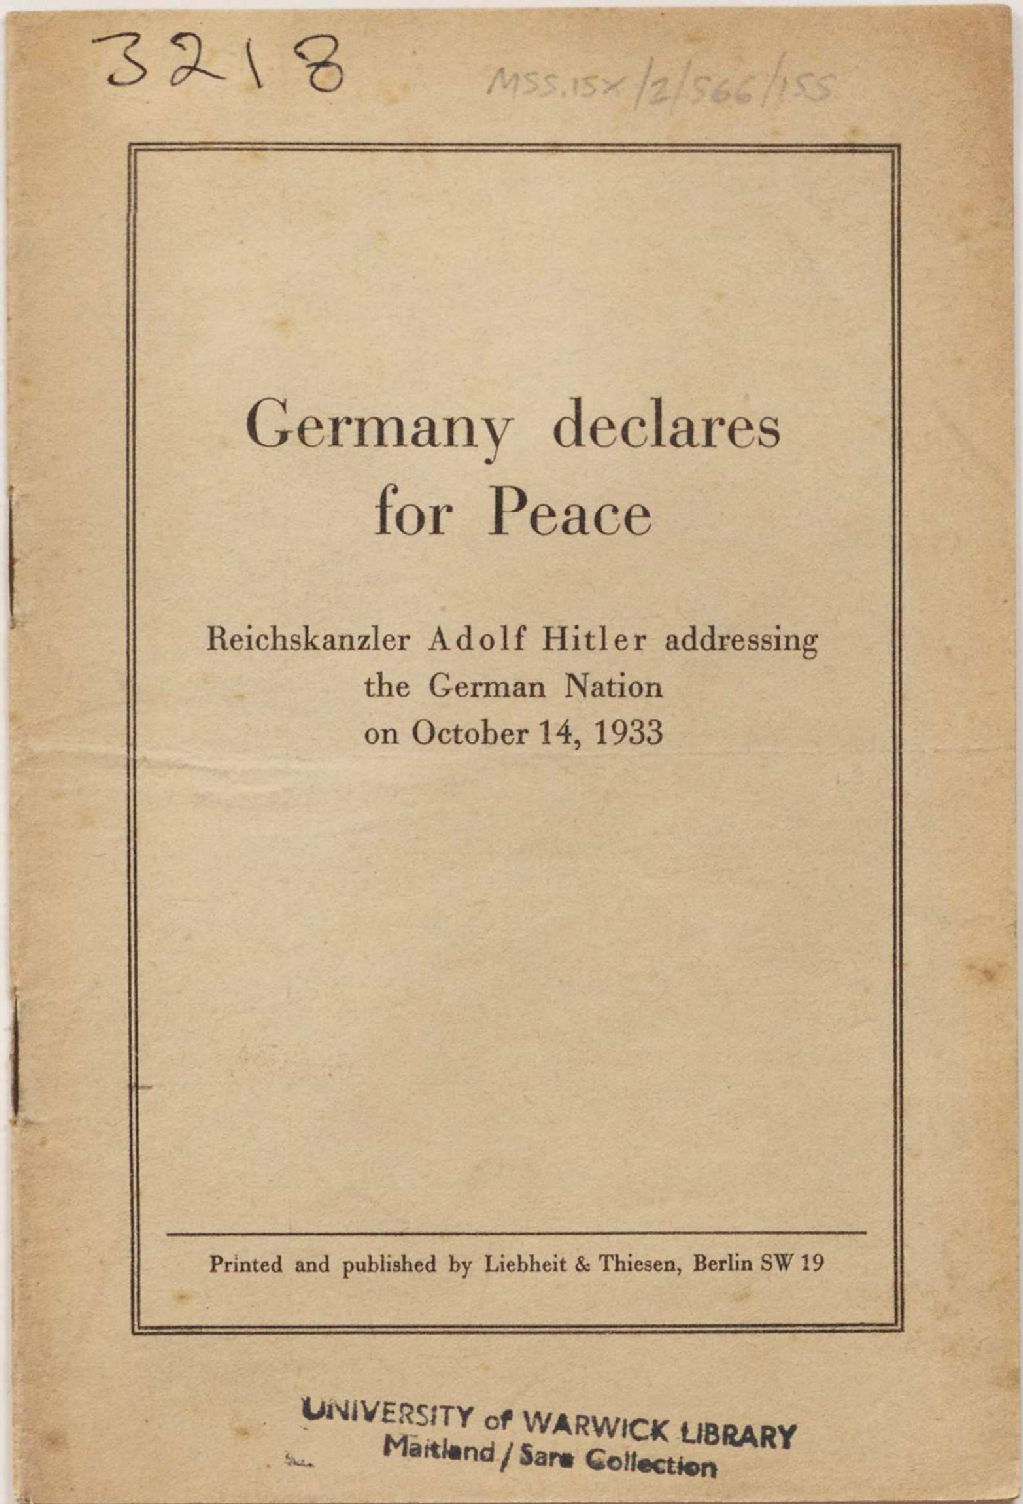 Germany declares for peace